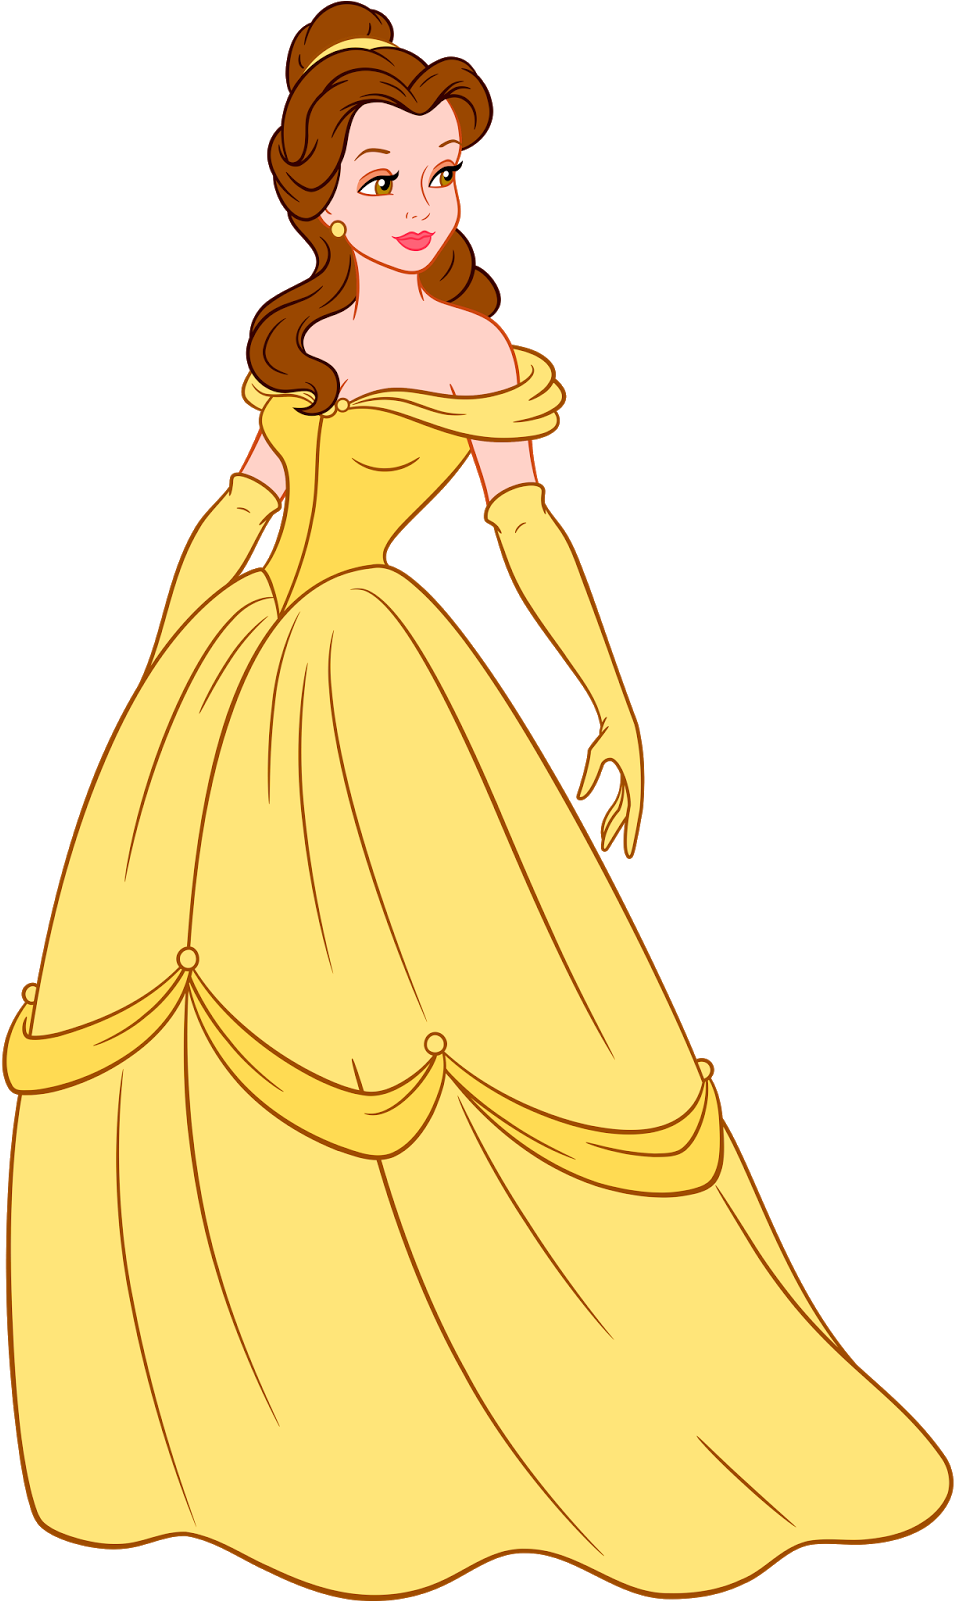 Download Another High Quality Share From Webdigitalpapers - Princes Of  Disney Belle PNG Image with No Background 